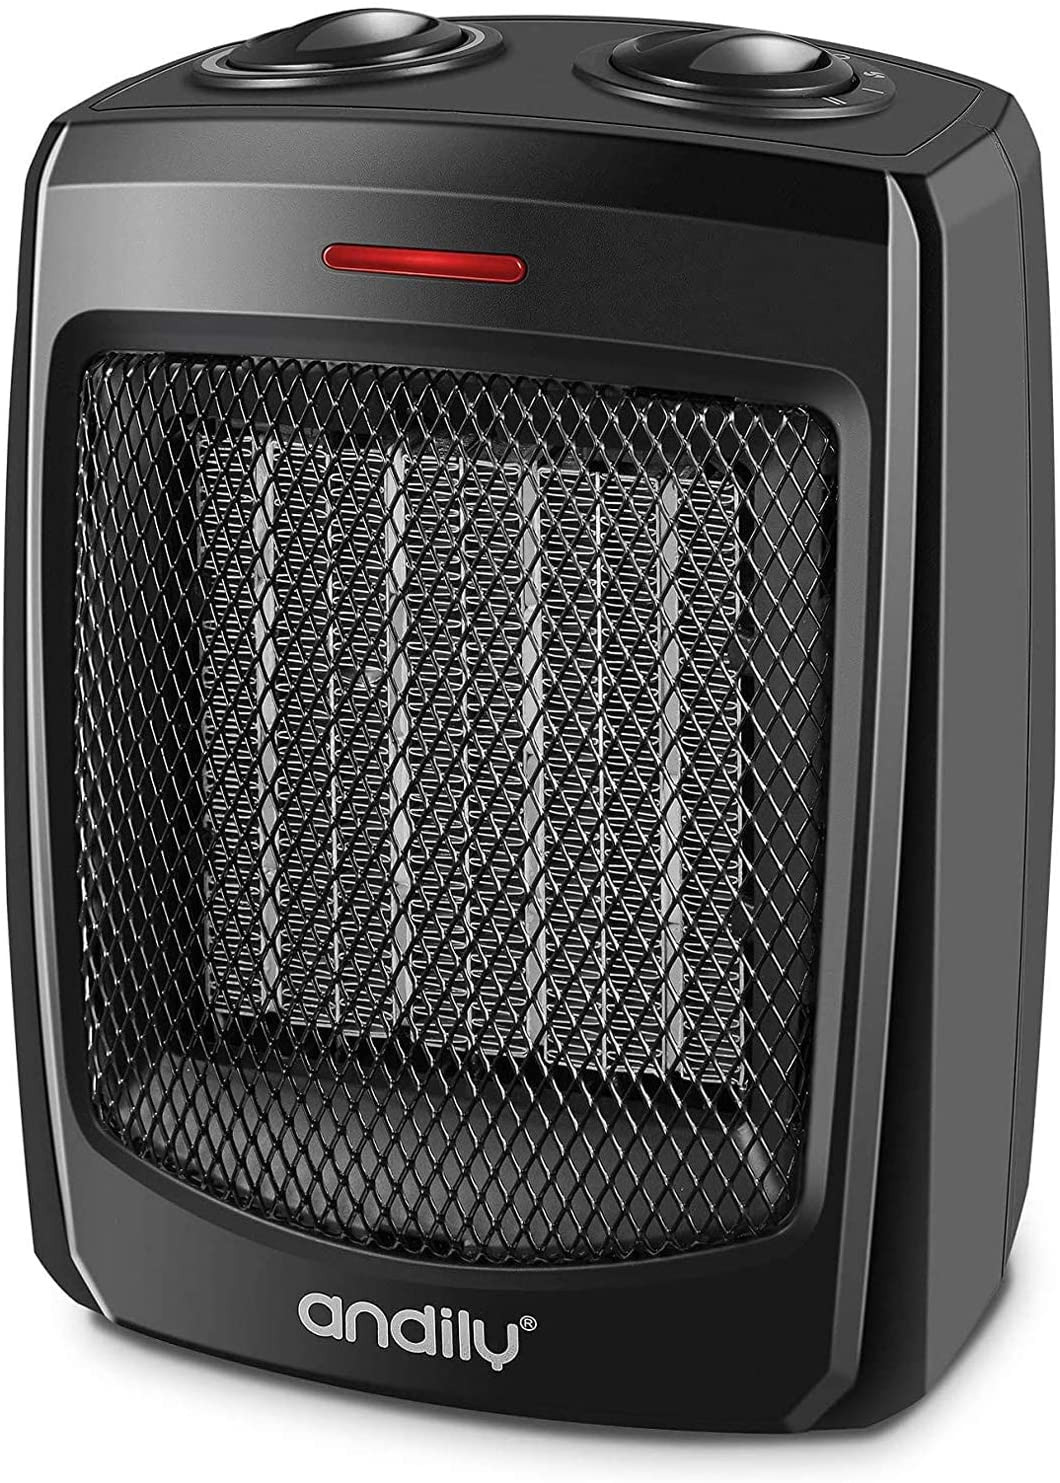 Andily Ceramic Space Heater for Home and Office with Thermostat, 750W/1500W\